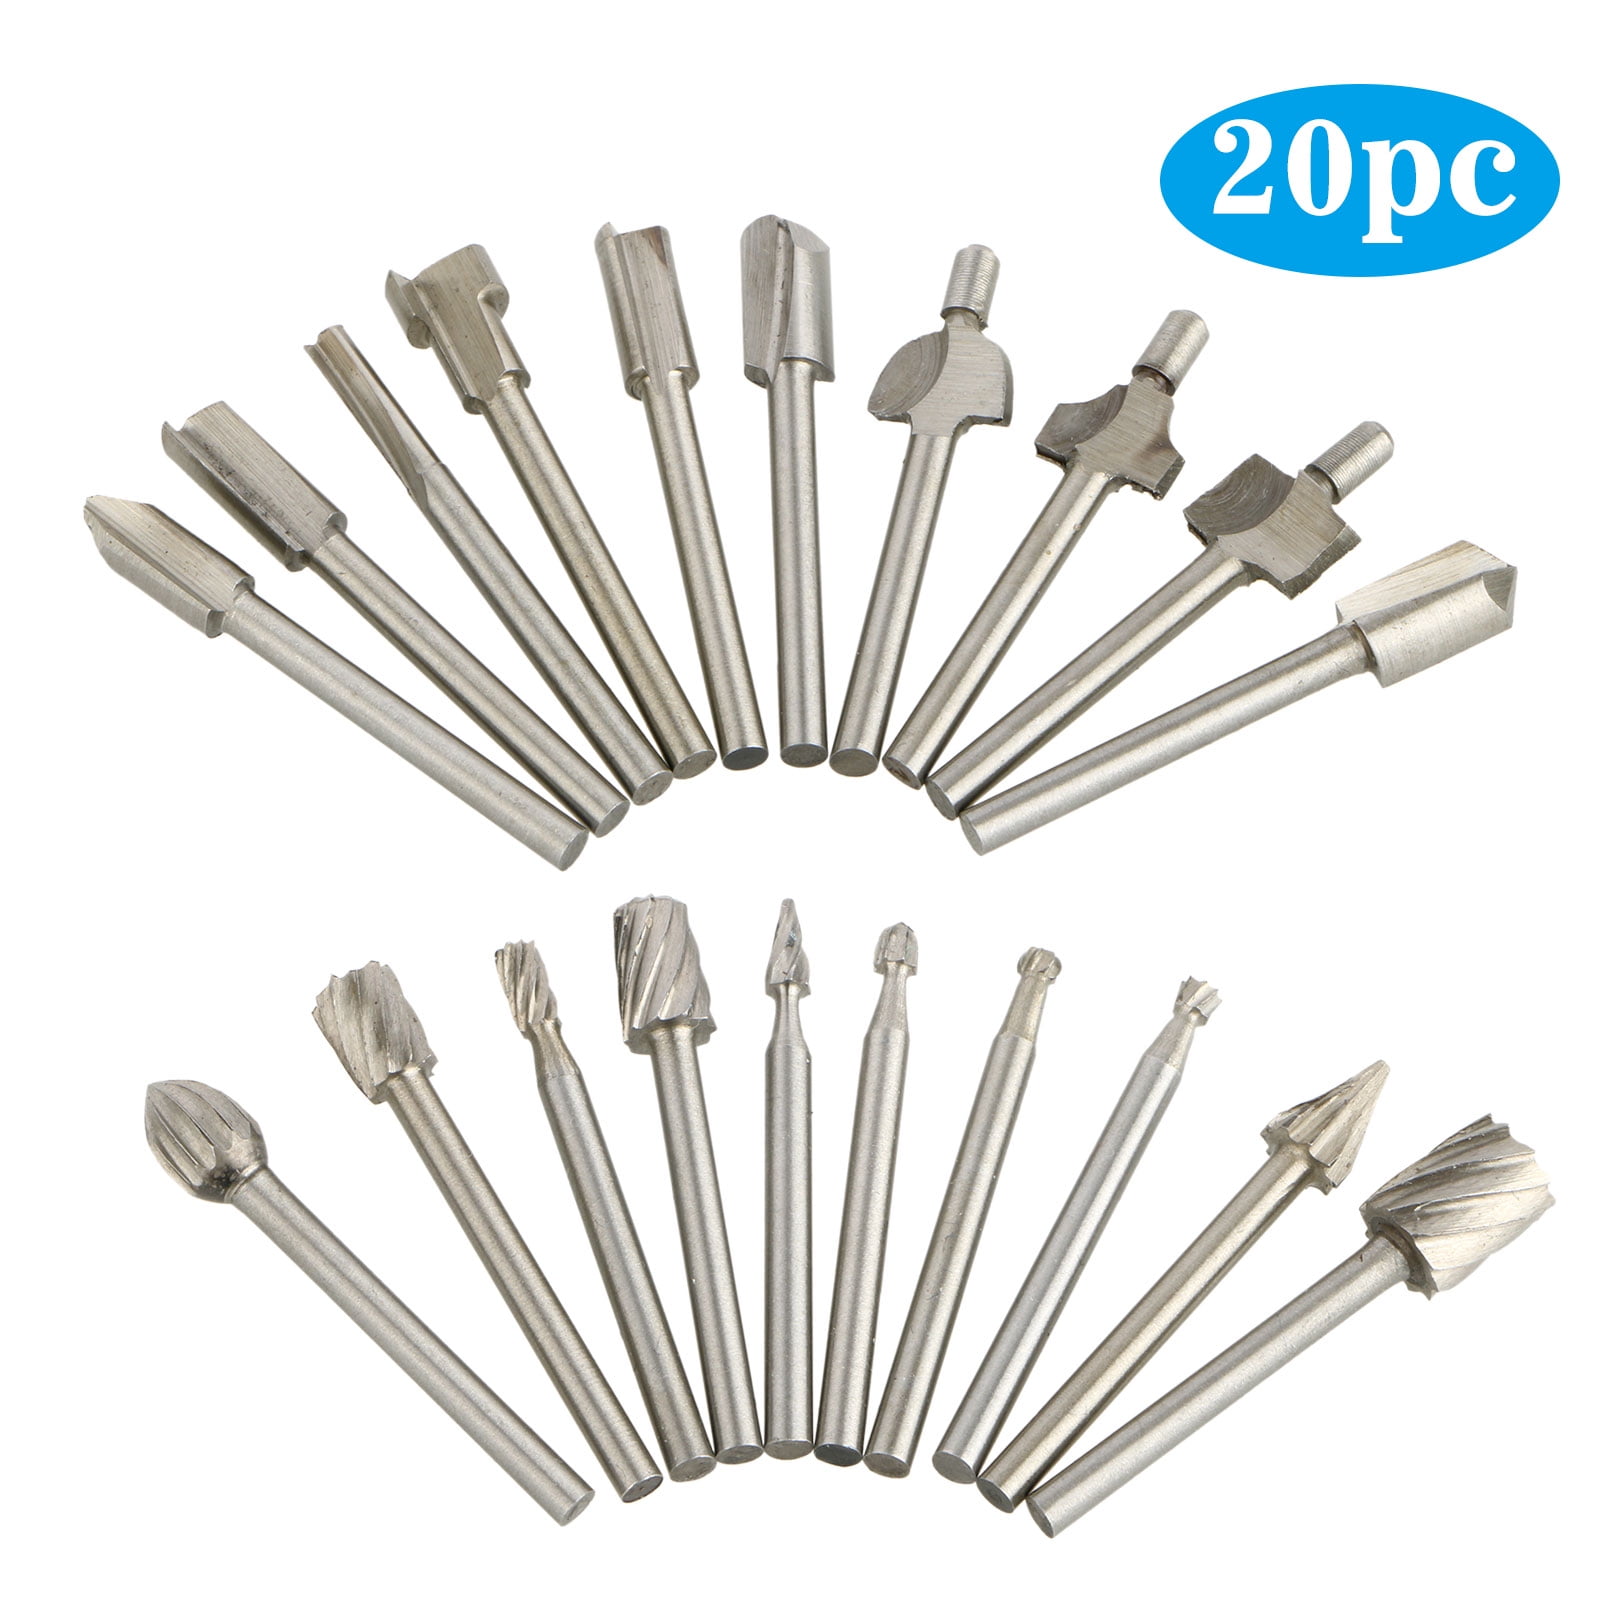 20Pcs High Quality Router Bits Wood Cutter Milling for Dremel Rotary Tool Bit 